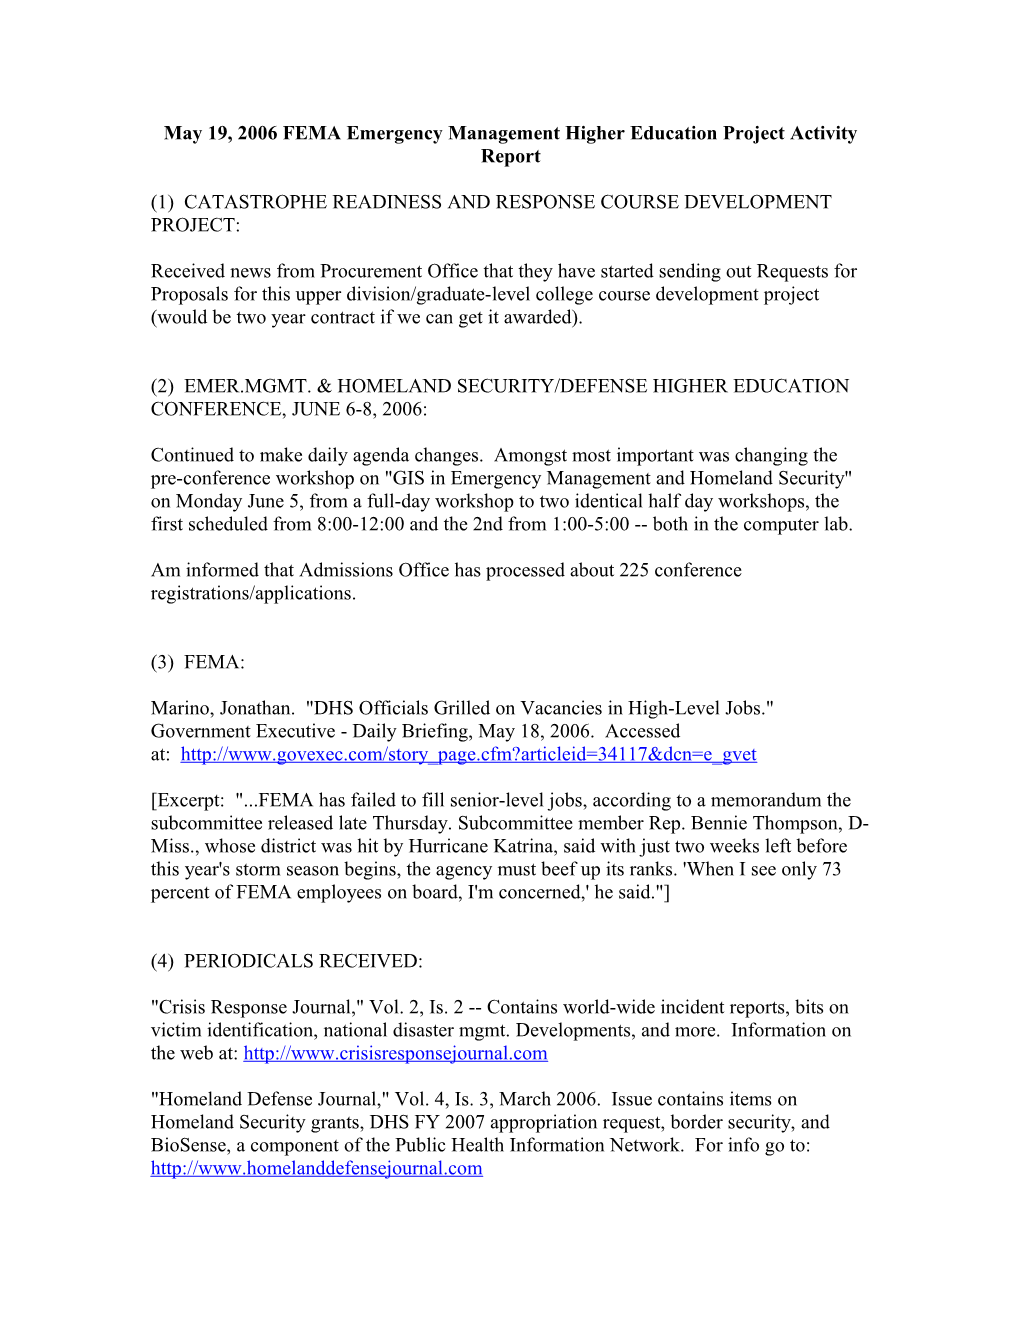 May 19, 2006 FEMA Emergency Management Higher Education Project Activity Report